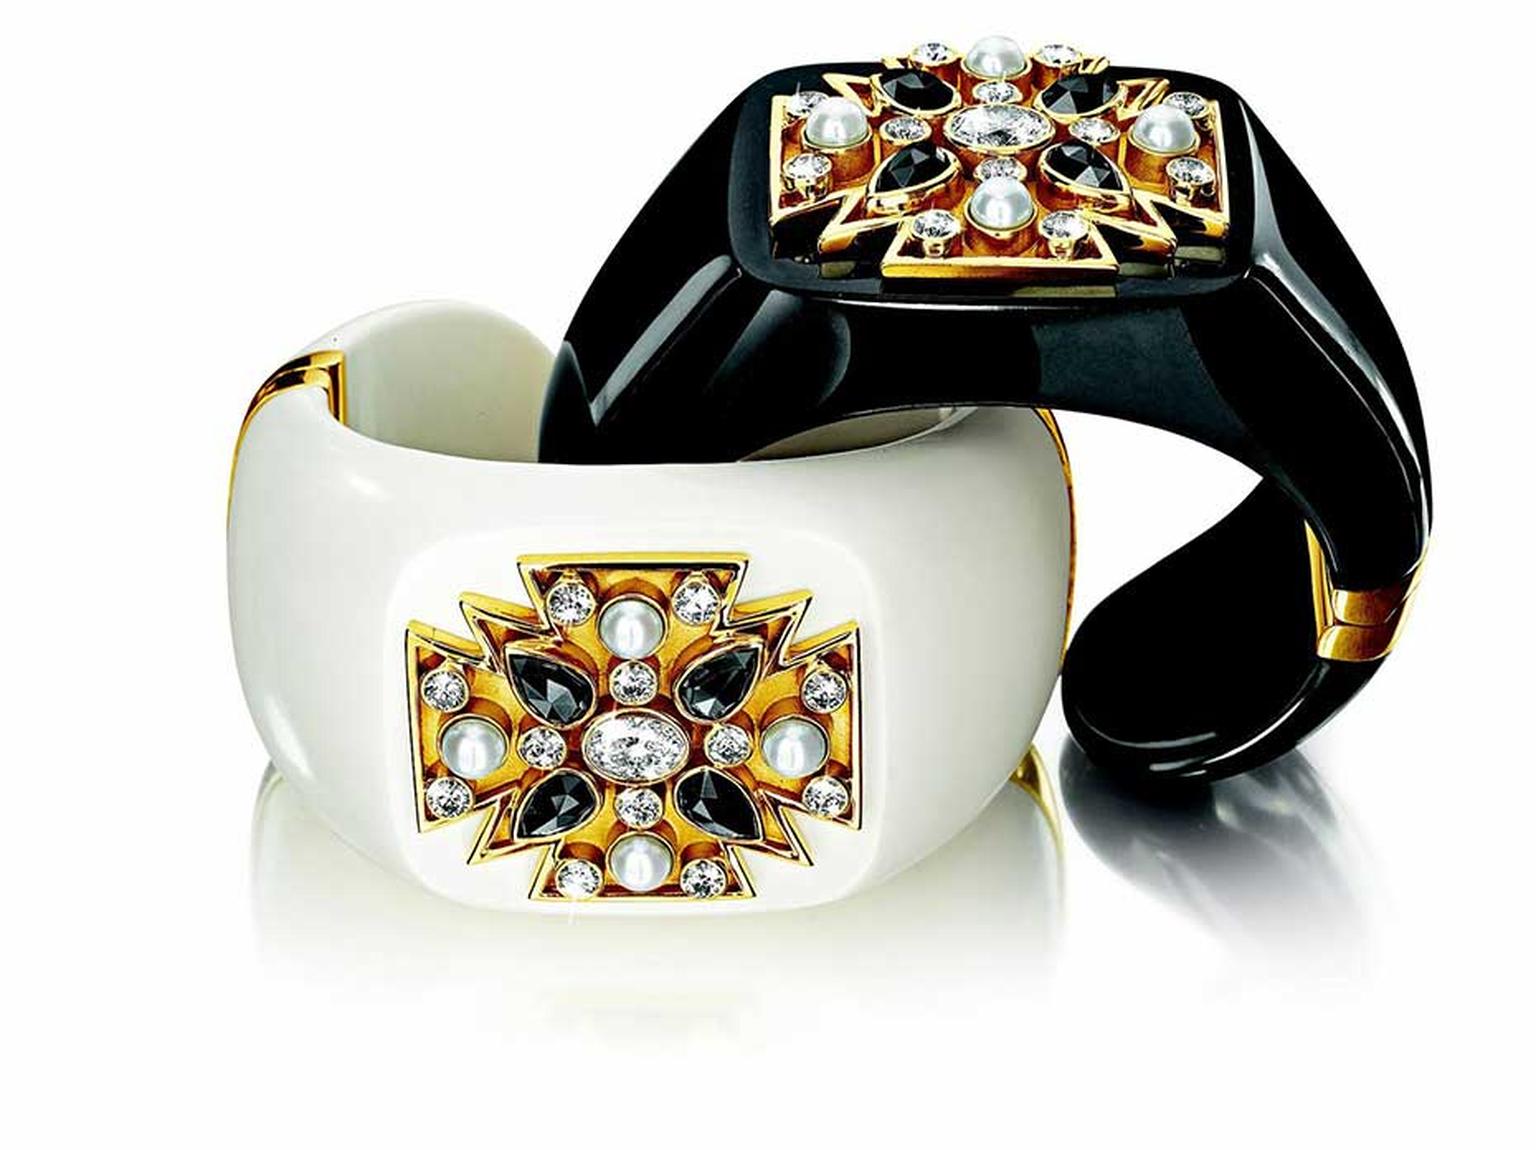 A regular of Masterpiece, Verdura made his name by making jewels for stylish women such as Coco Chanel. Shown is Verdura's Maltese cuff with mammoth ivory or black jade with diamonds, pearls and gold.